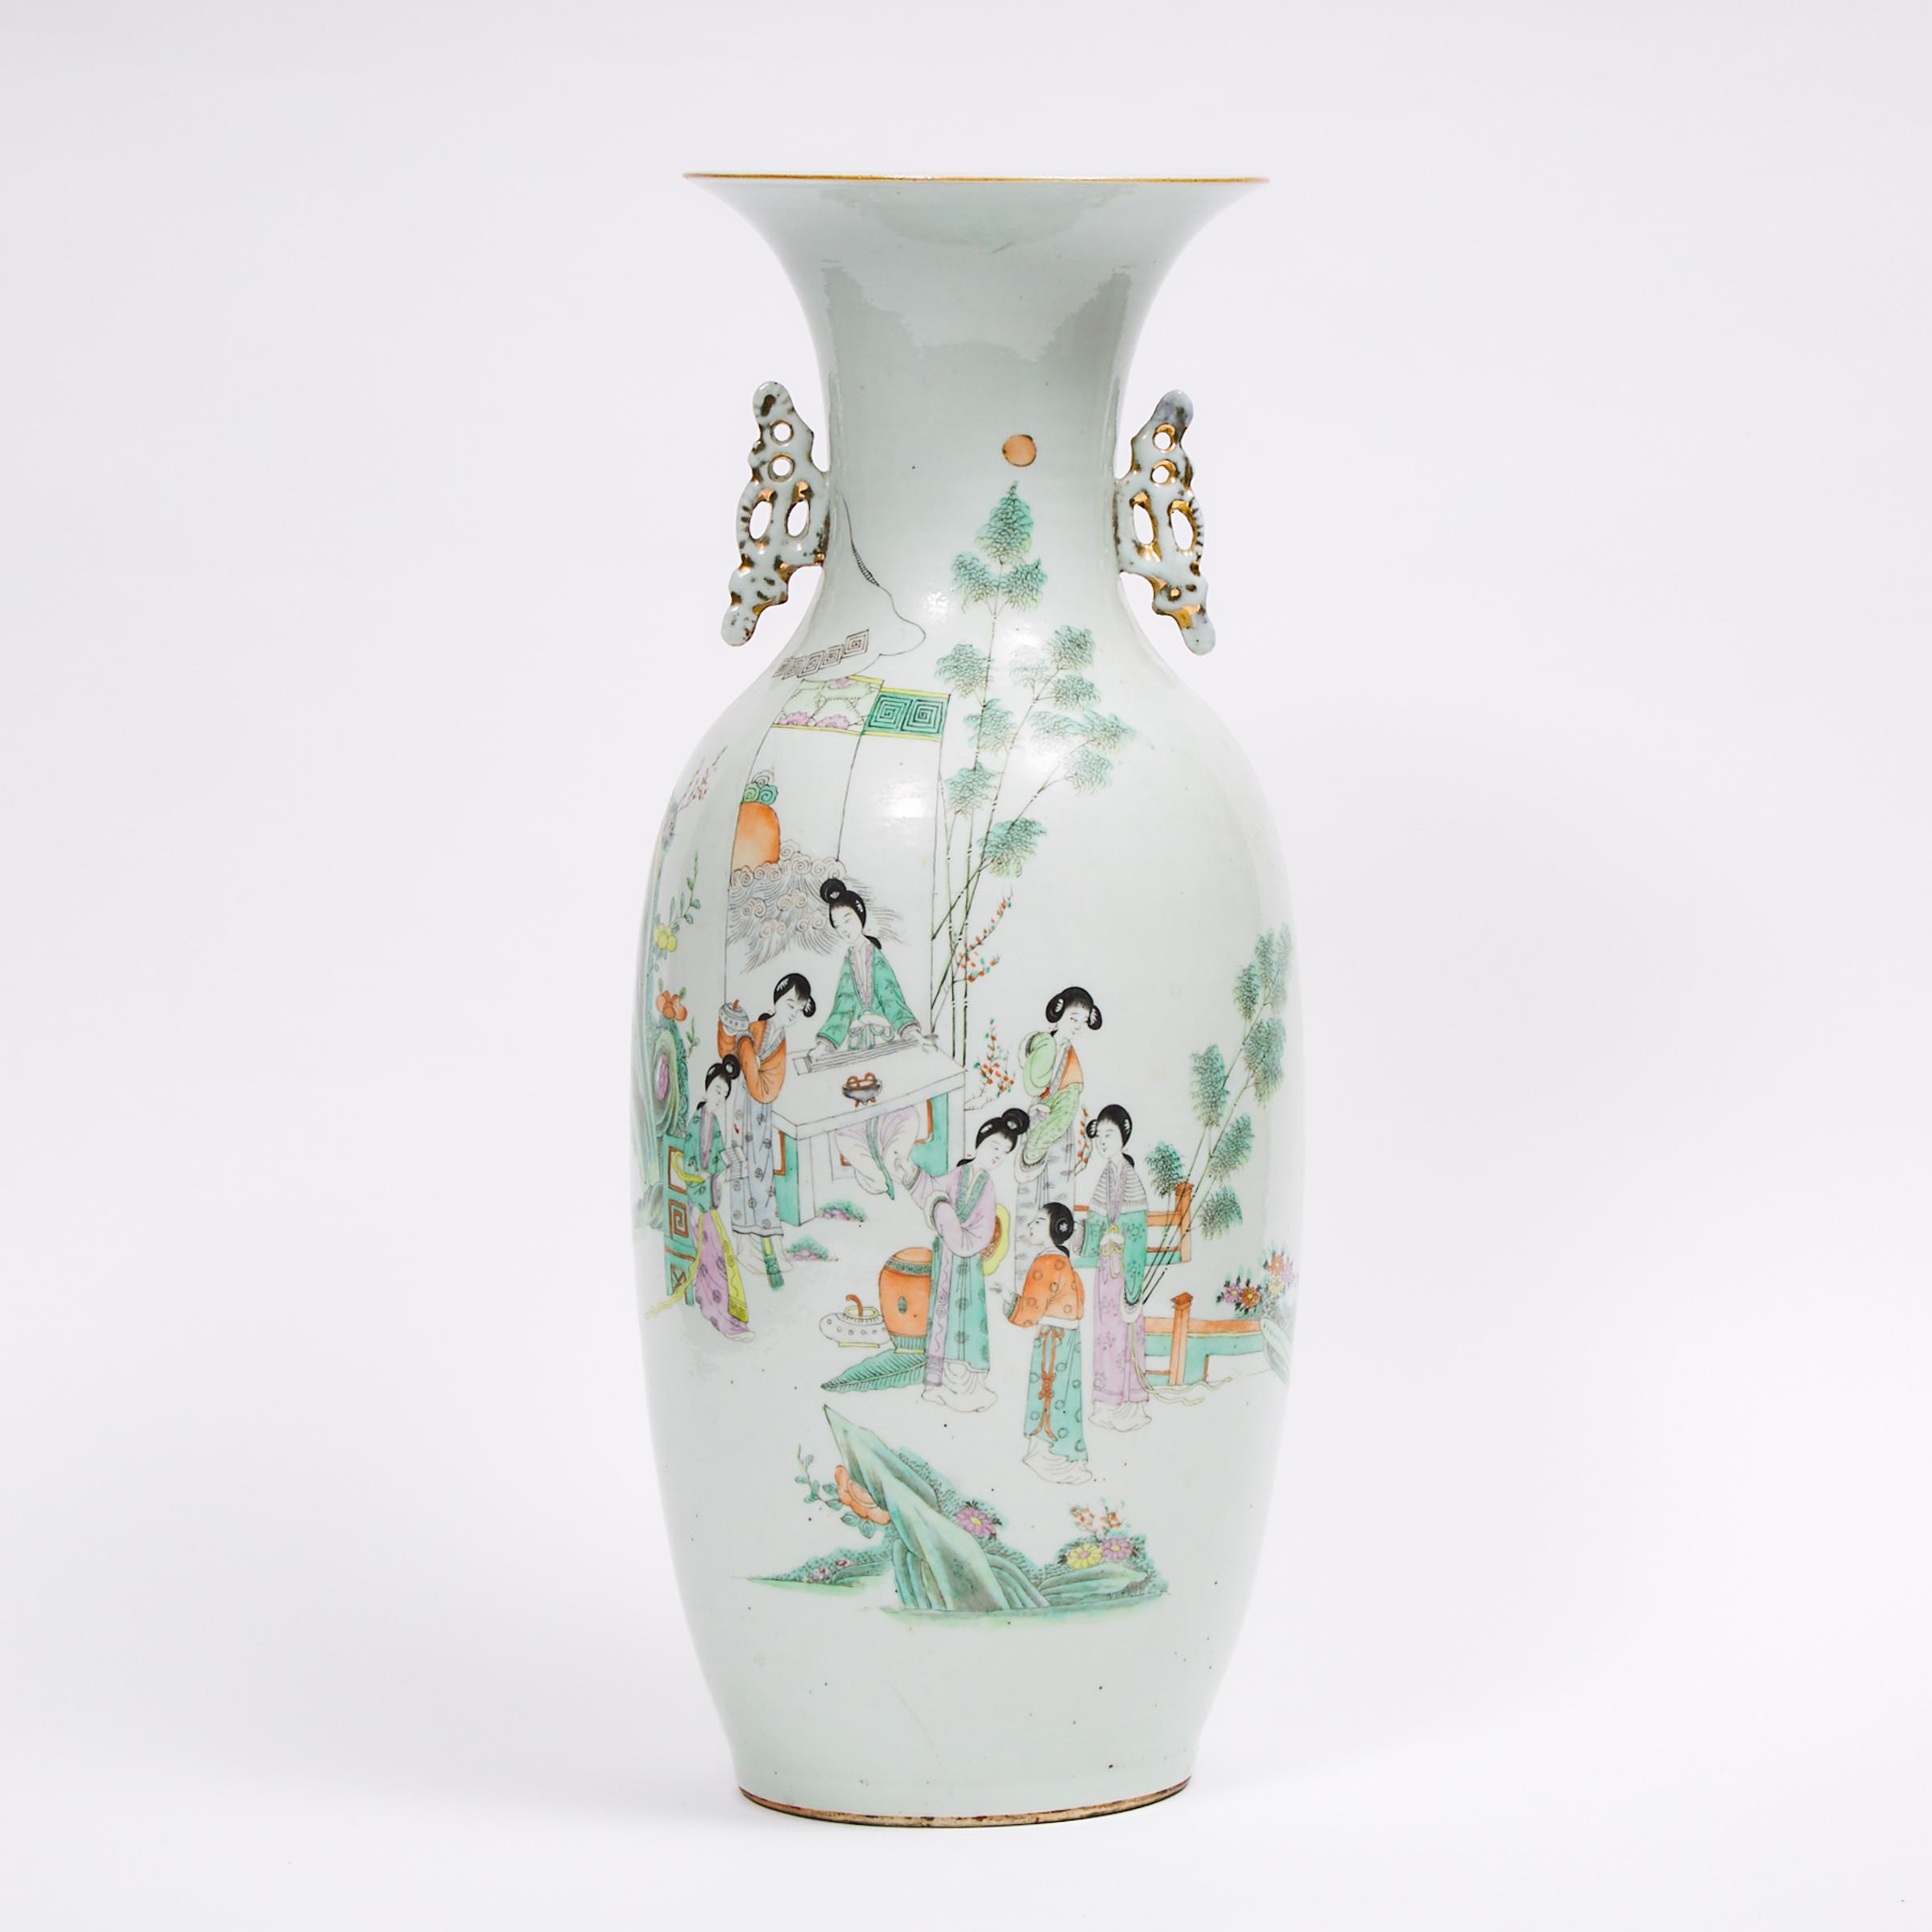 A Large Enameled Porcelain Vase with Figures and Calligraphy